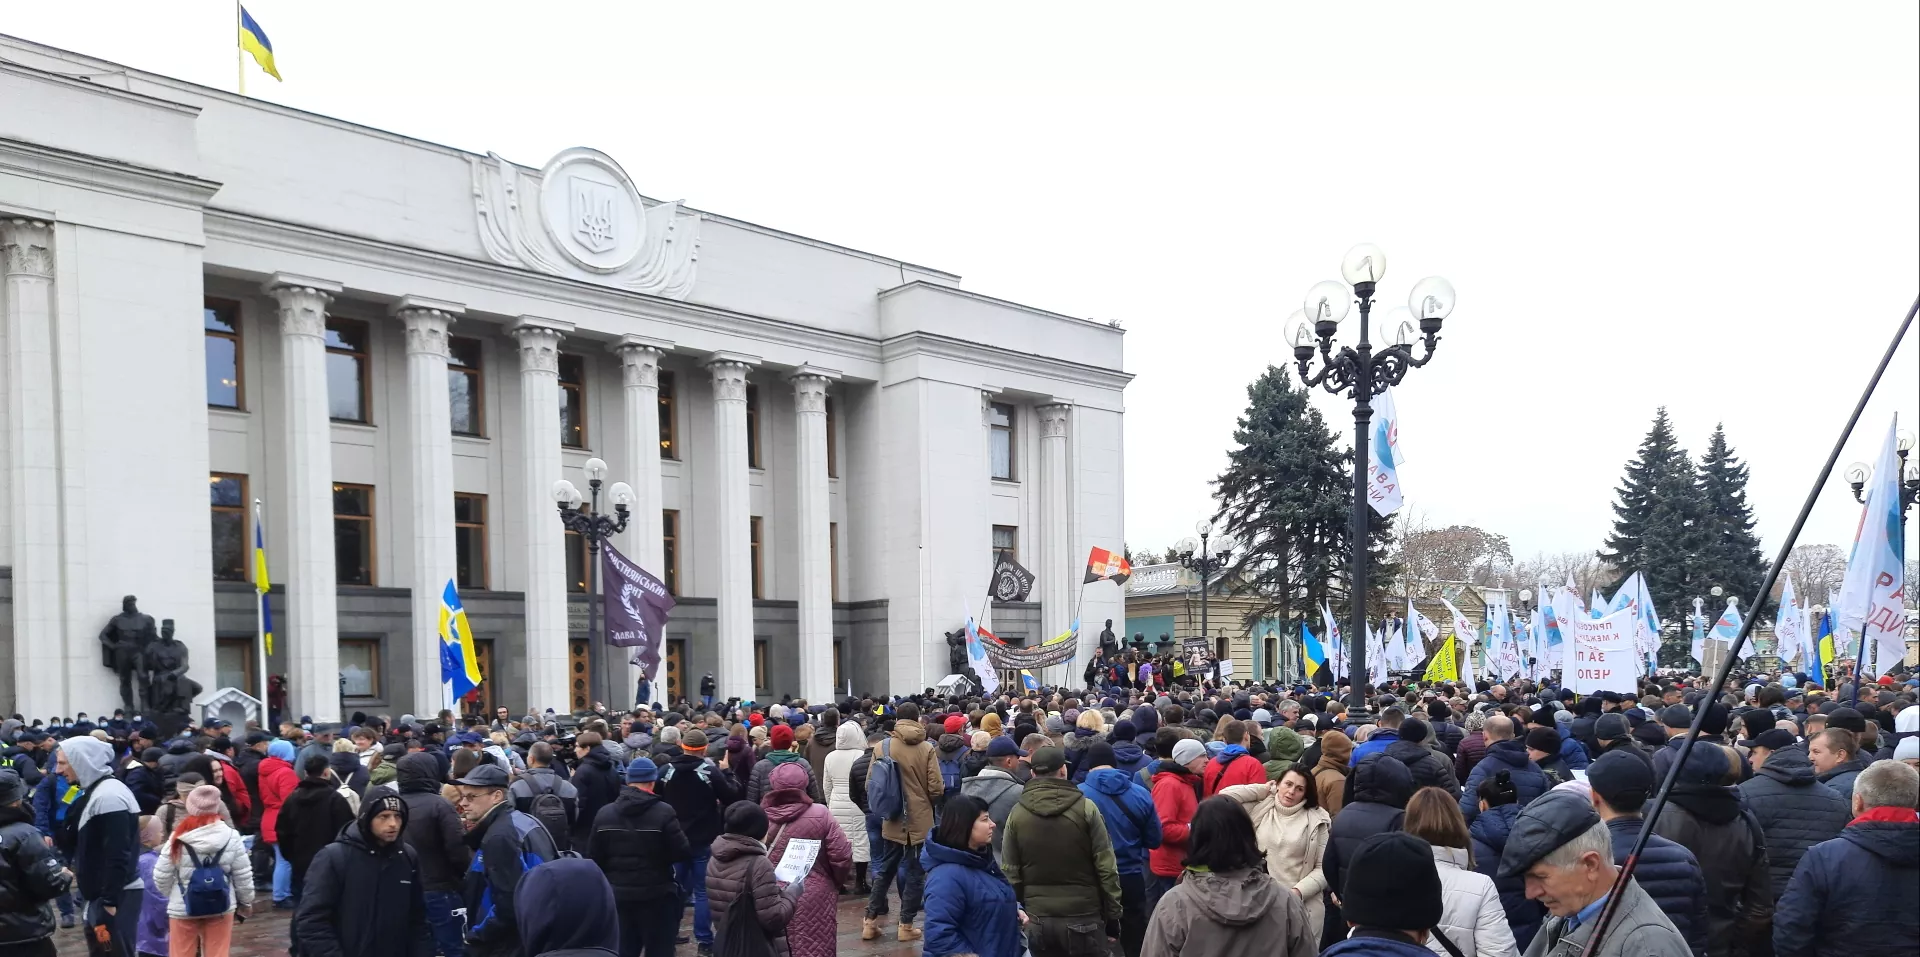 Lockdown and vaccination opponents protest in Kyiv amid COVID 19 surge